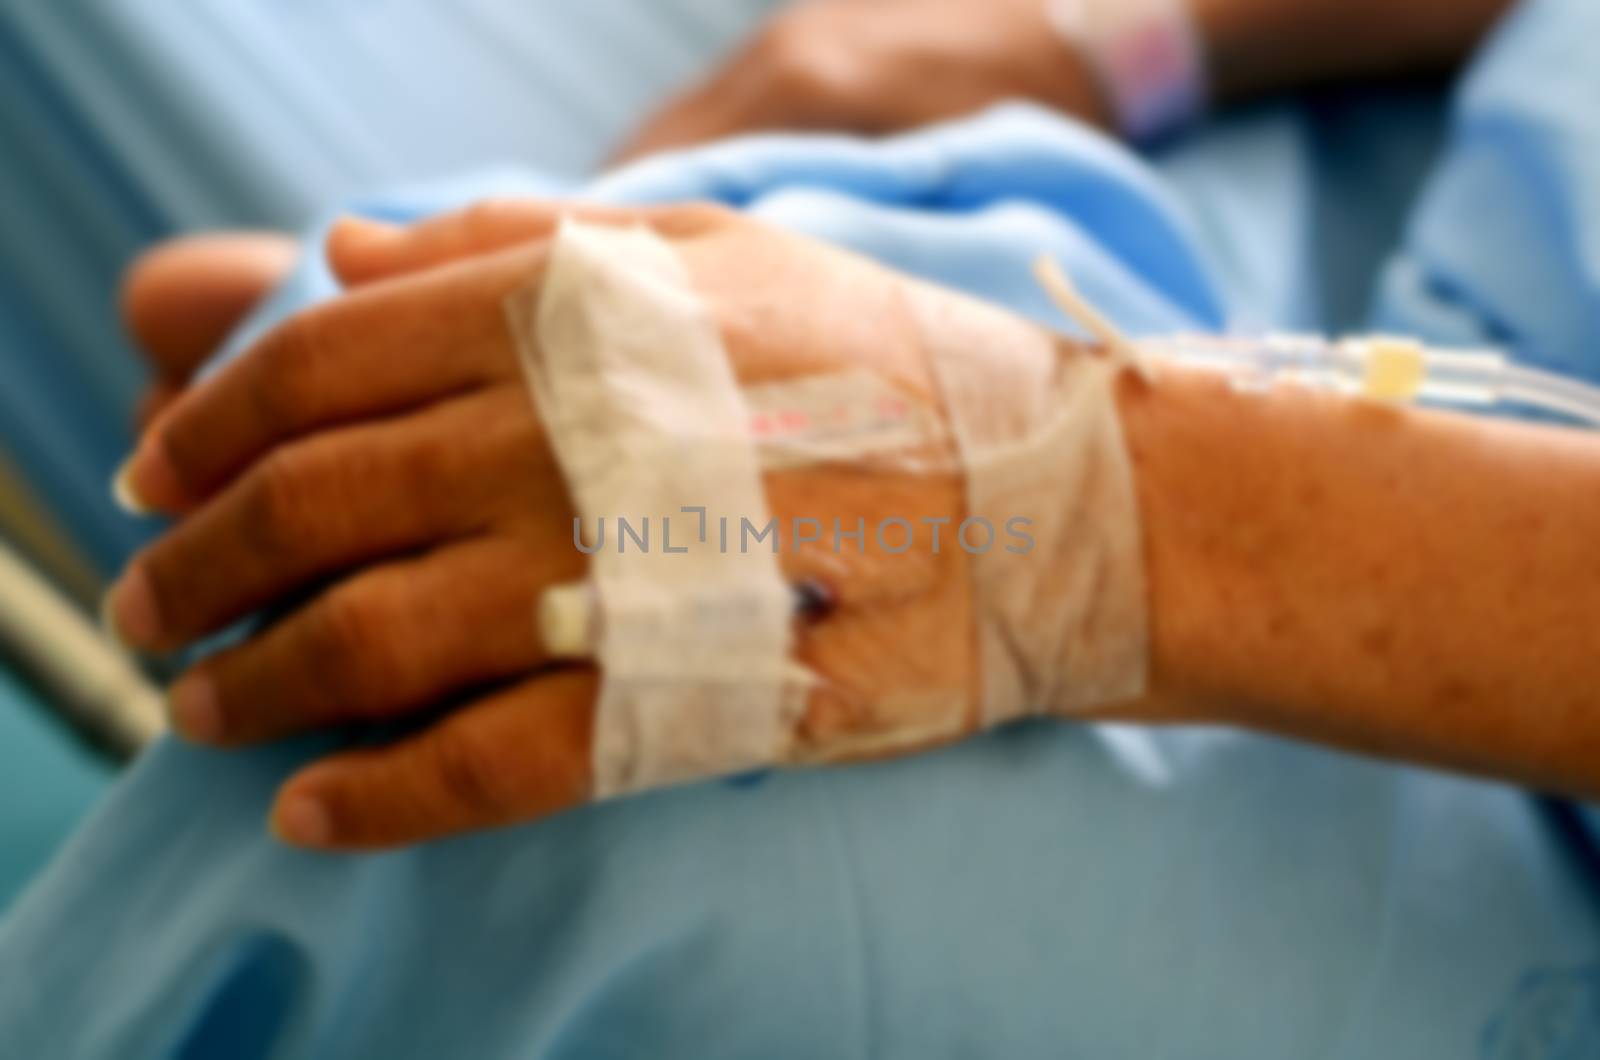 Abstract blurred IV Solution in a senior patient hand by gypsygraphy